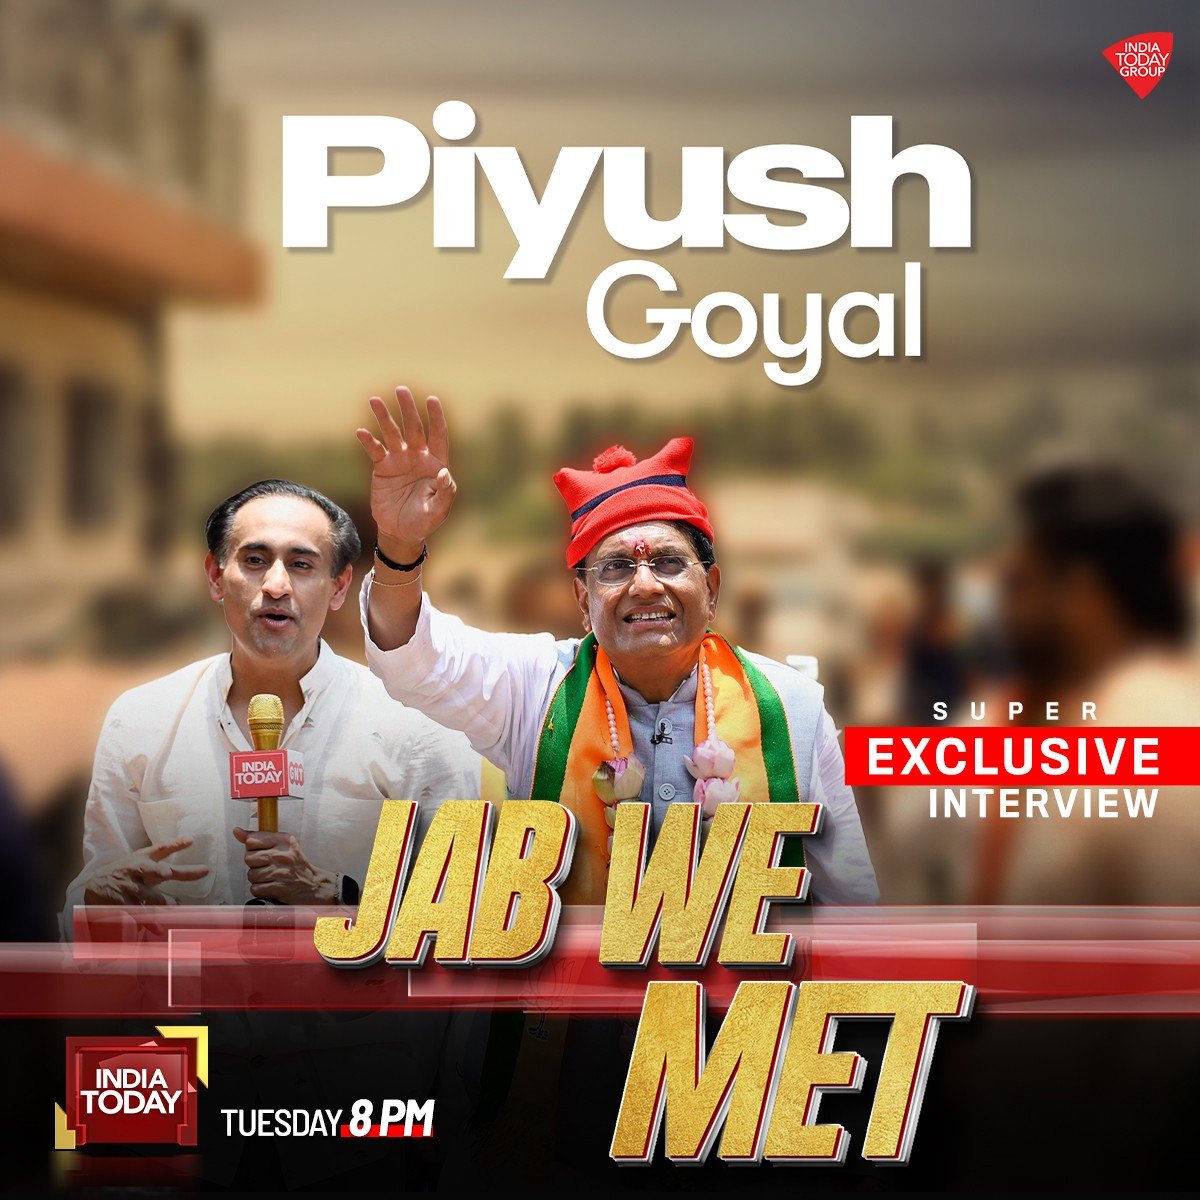 Minister of Commerce and Industry, @PiyushGoyal, in a candid conversation with @rahulkanwal on #JabWeMet tomorrow at 8 p.m.

Watch this #SuperExclusive interview on India Today.

#Promo